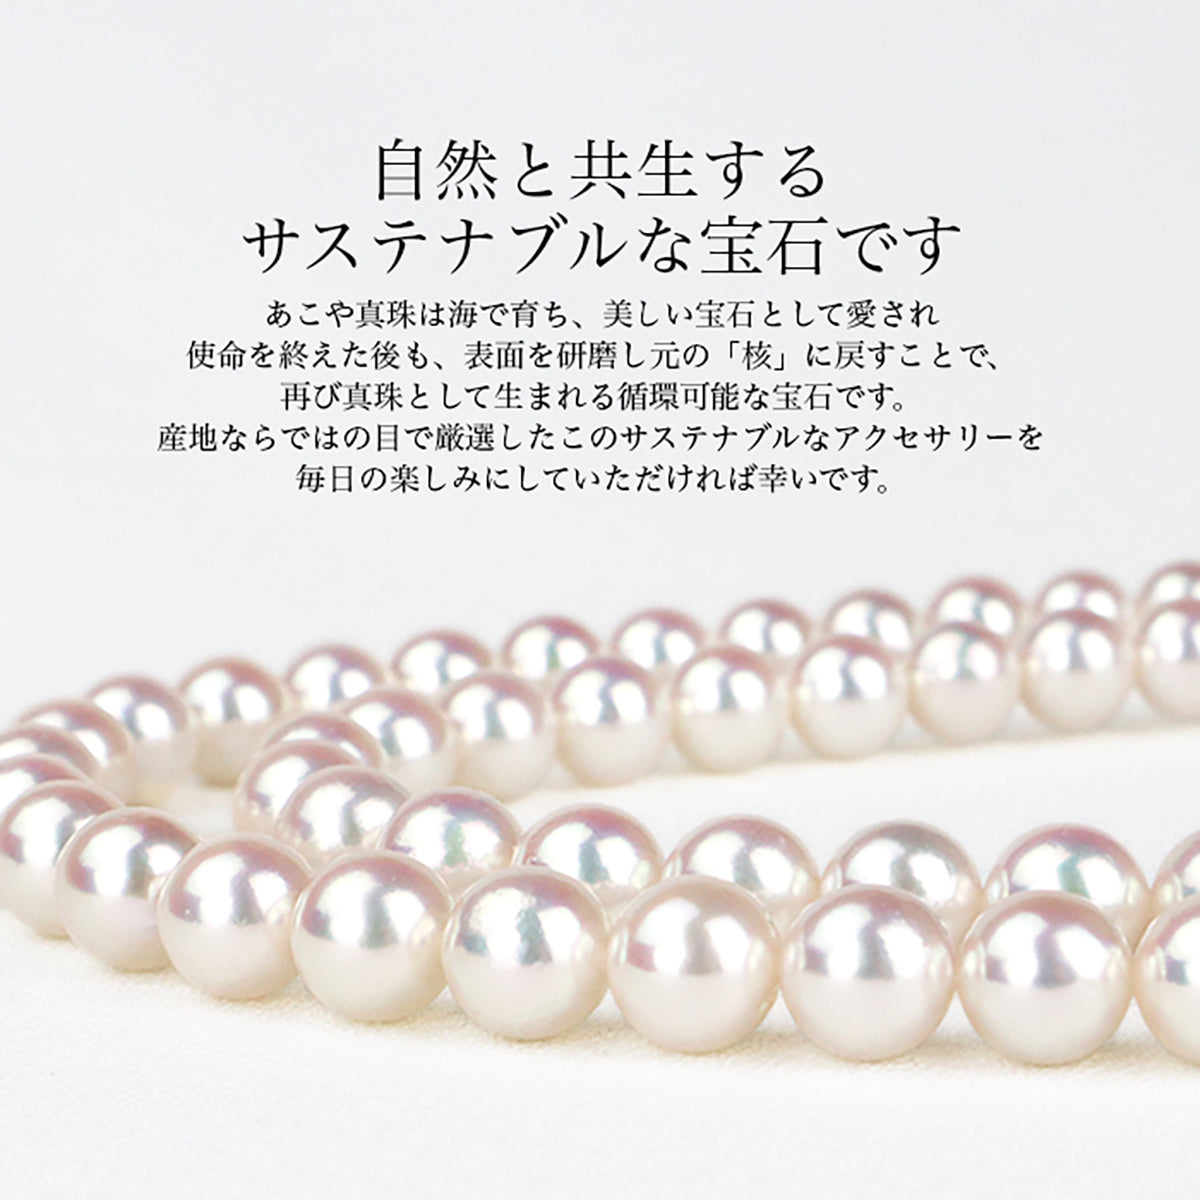 Akoya pearl cherry blossom pendant [5.0-6.5mm] 2 colors brass 《Silver/Gold》 Pearl necklace